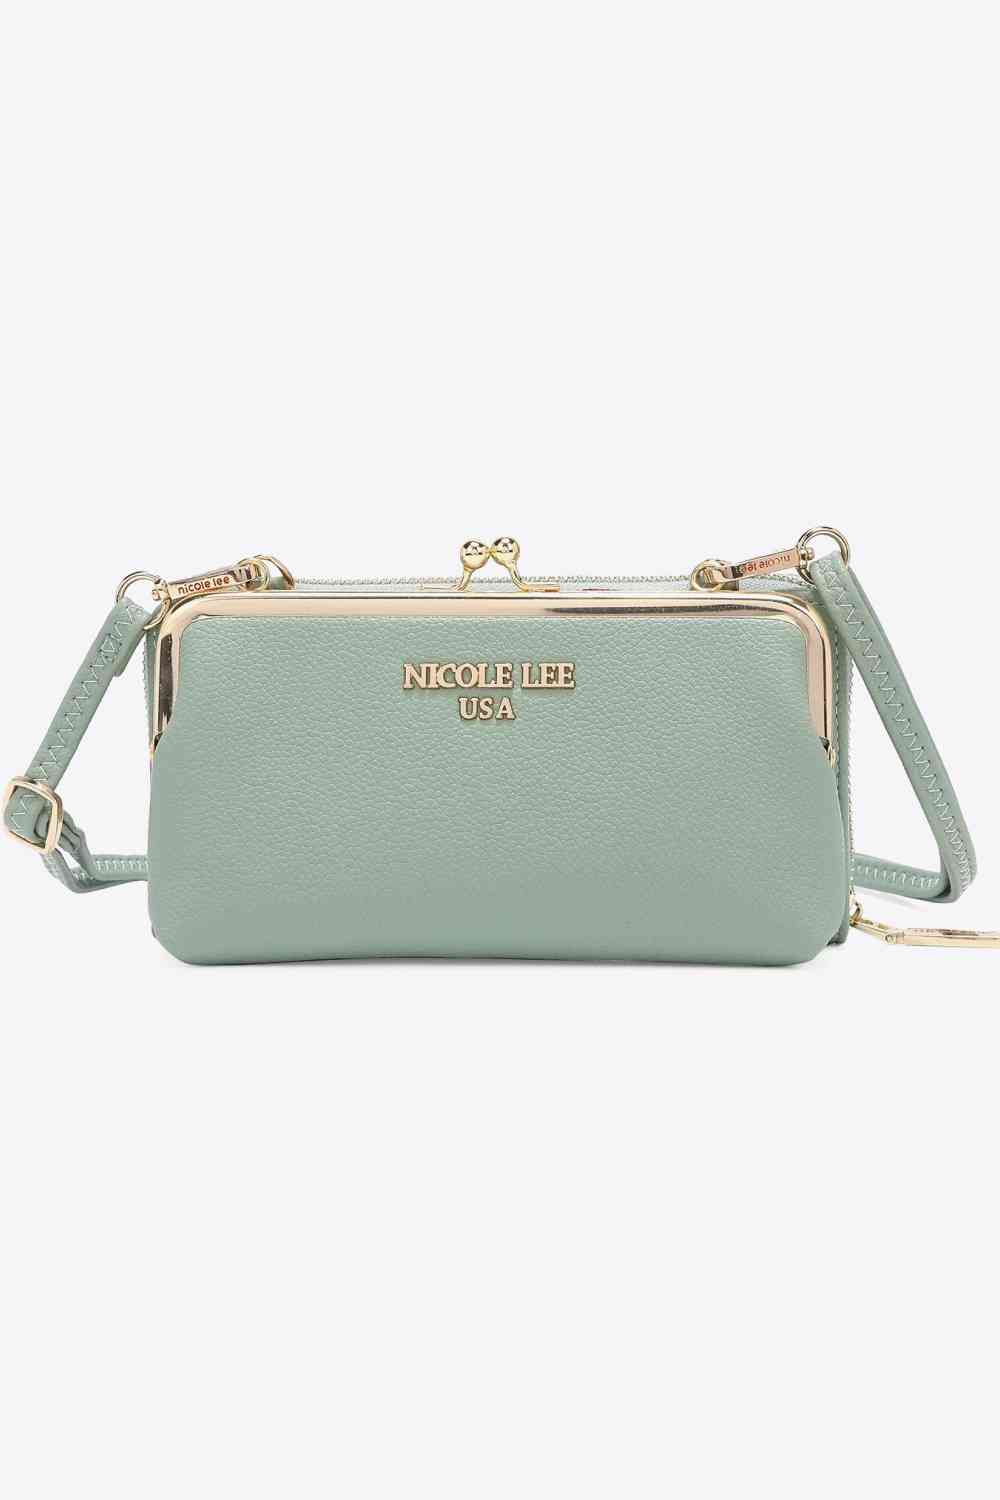 Nicole Lee USA Night Out Crossbody Wallet Purse Light Green One Size